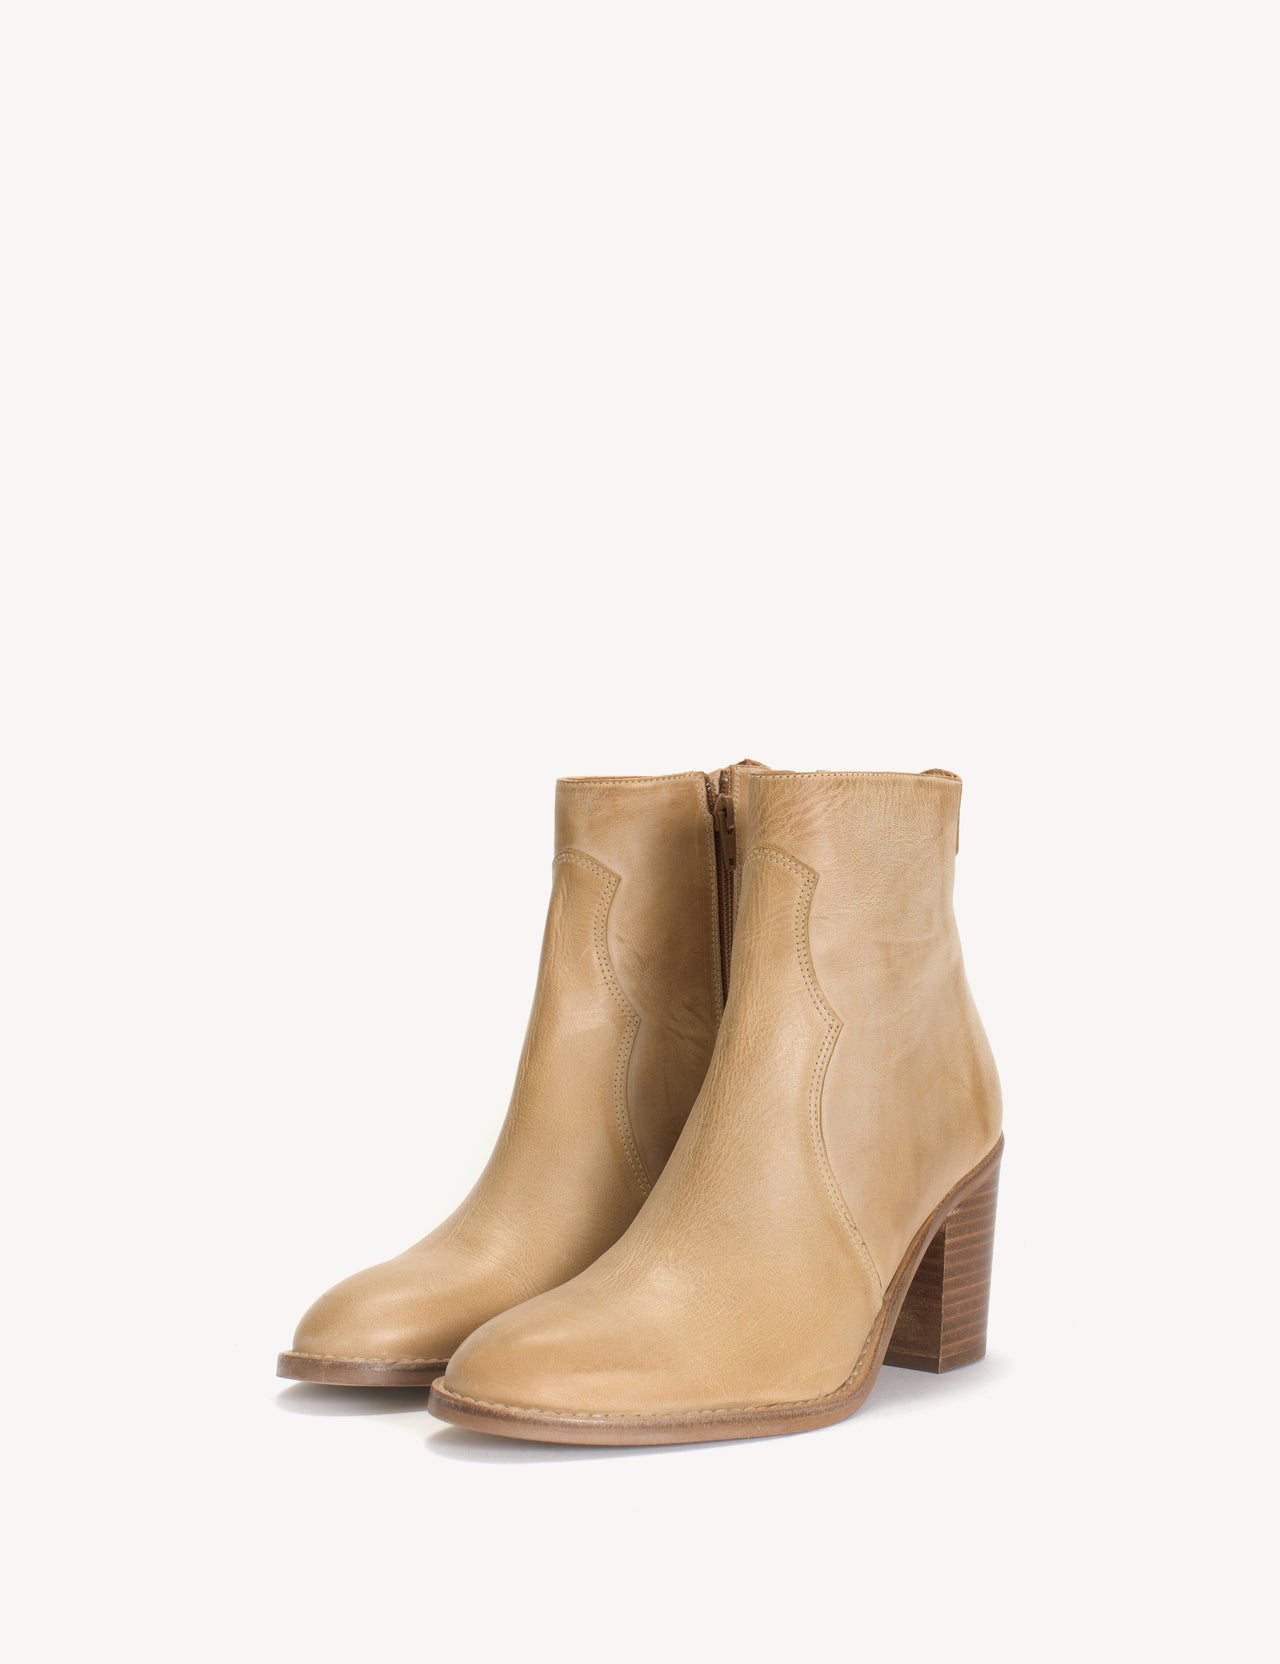 Jeanet Boot In Light Tan Escovado Leather